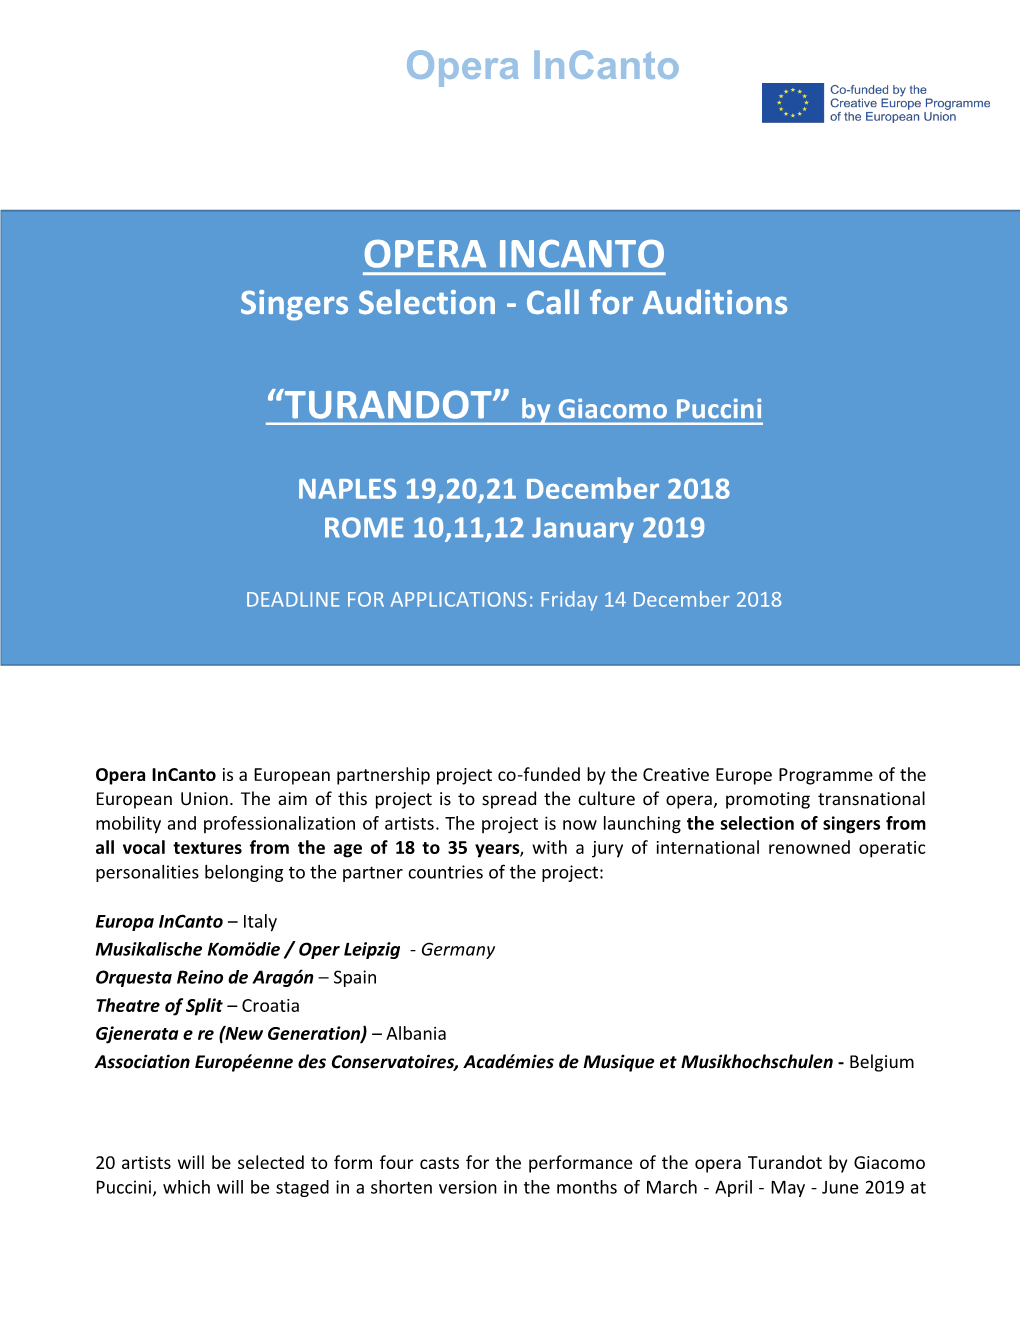 OPERA INCANTO Singers Selection - Call for Auditions